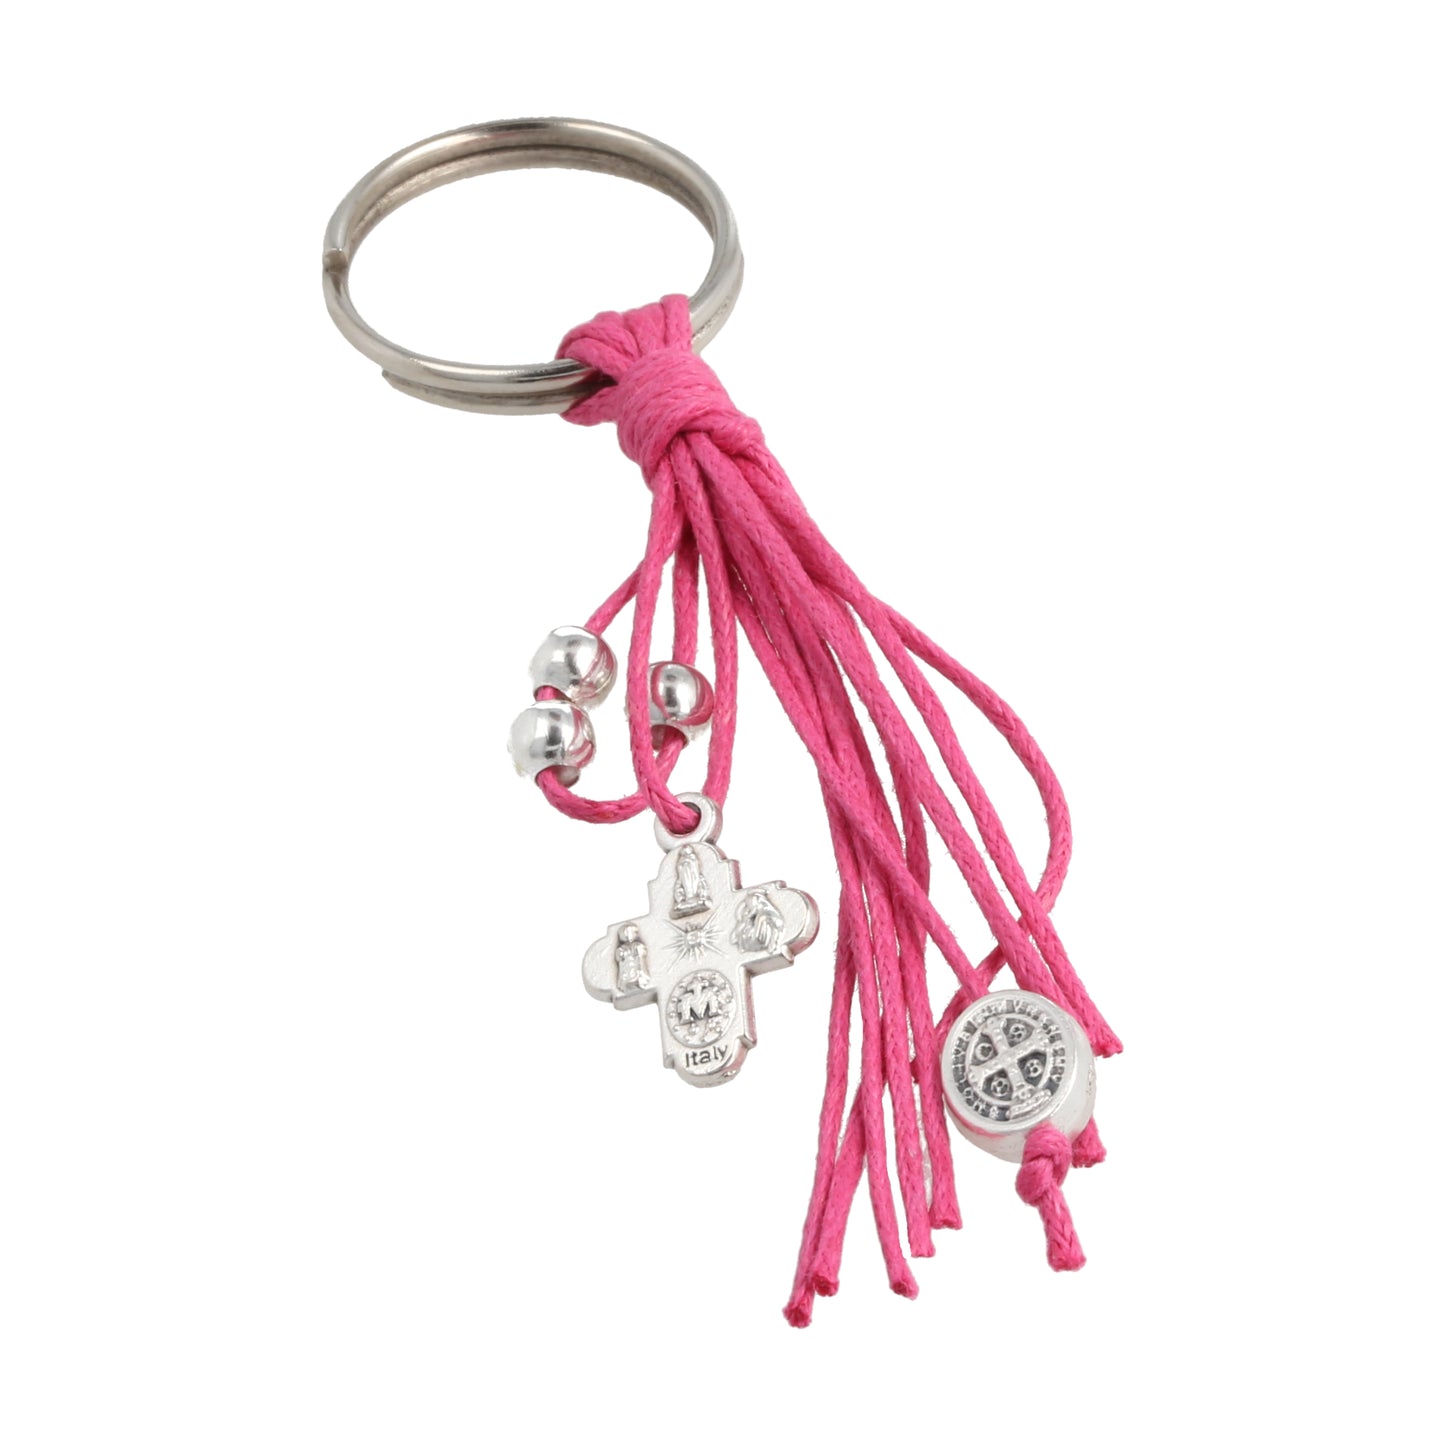 Keychain Rope Silver Metal Color Rose Cross. Souvenirs from Italy